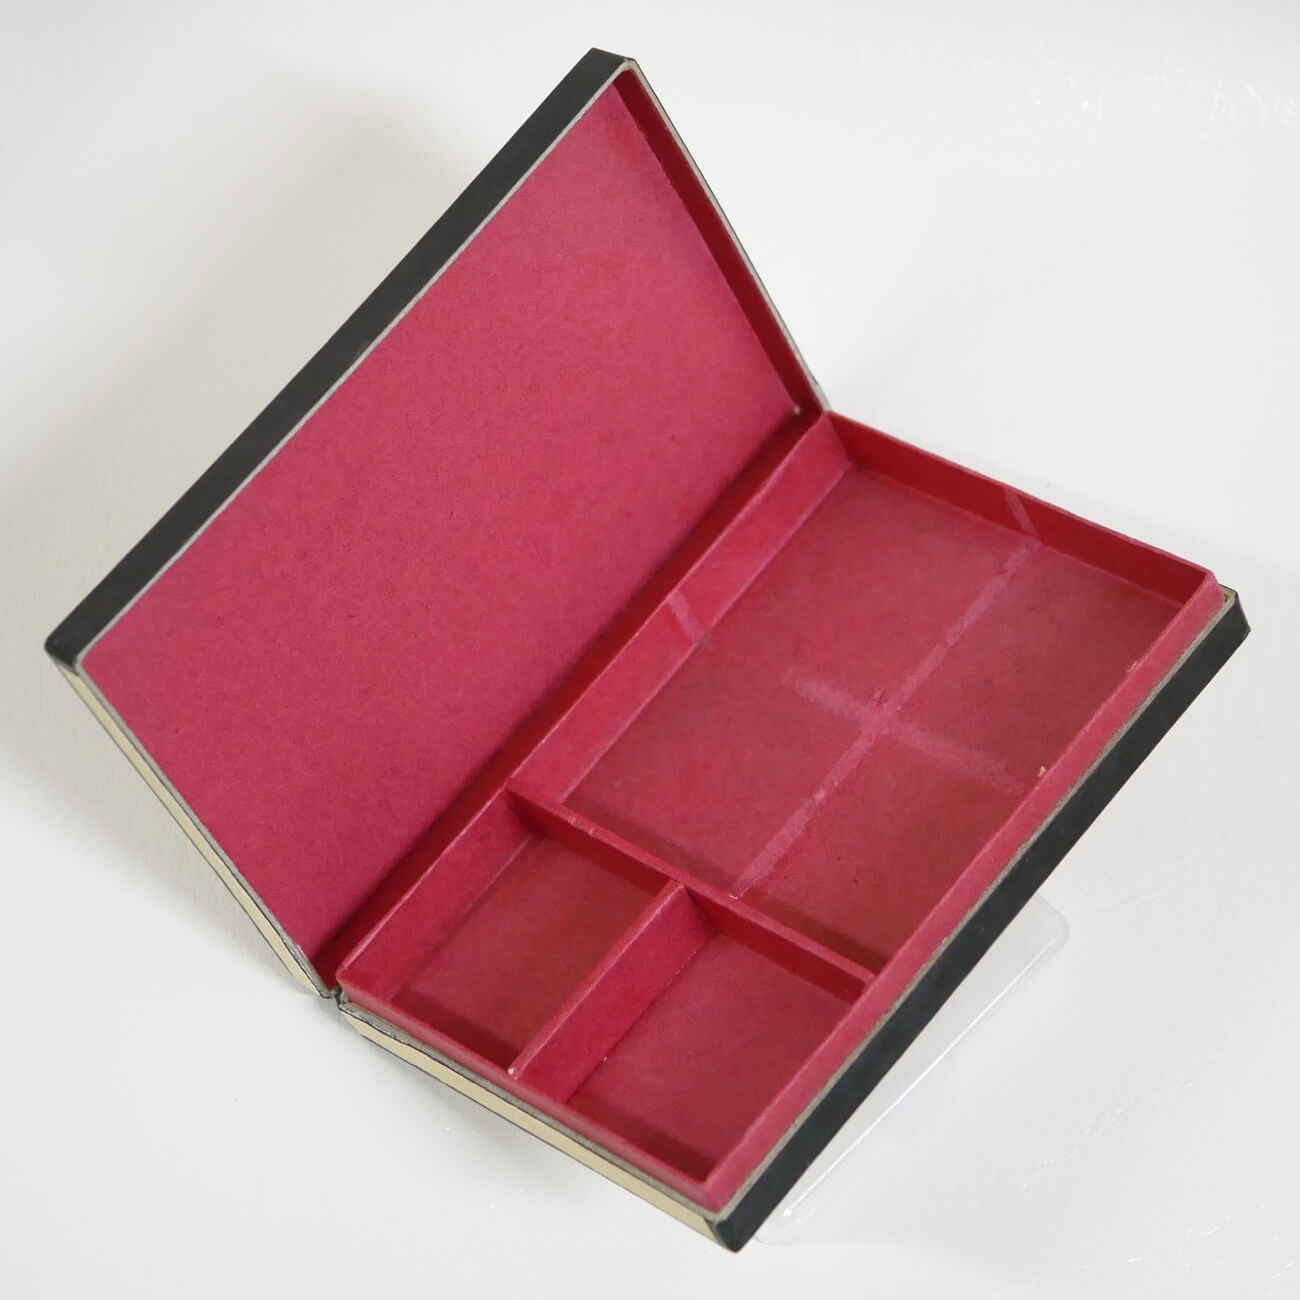 WATCH CASE & OTHER LONGINES PAPERBOX